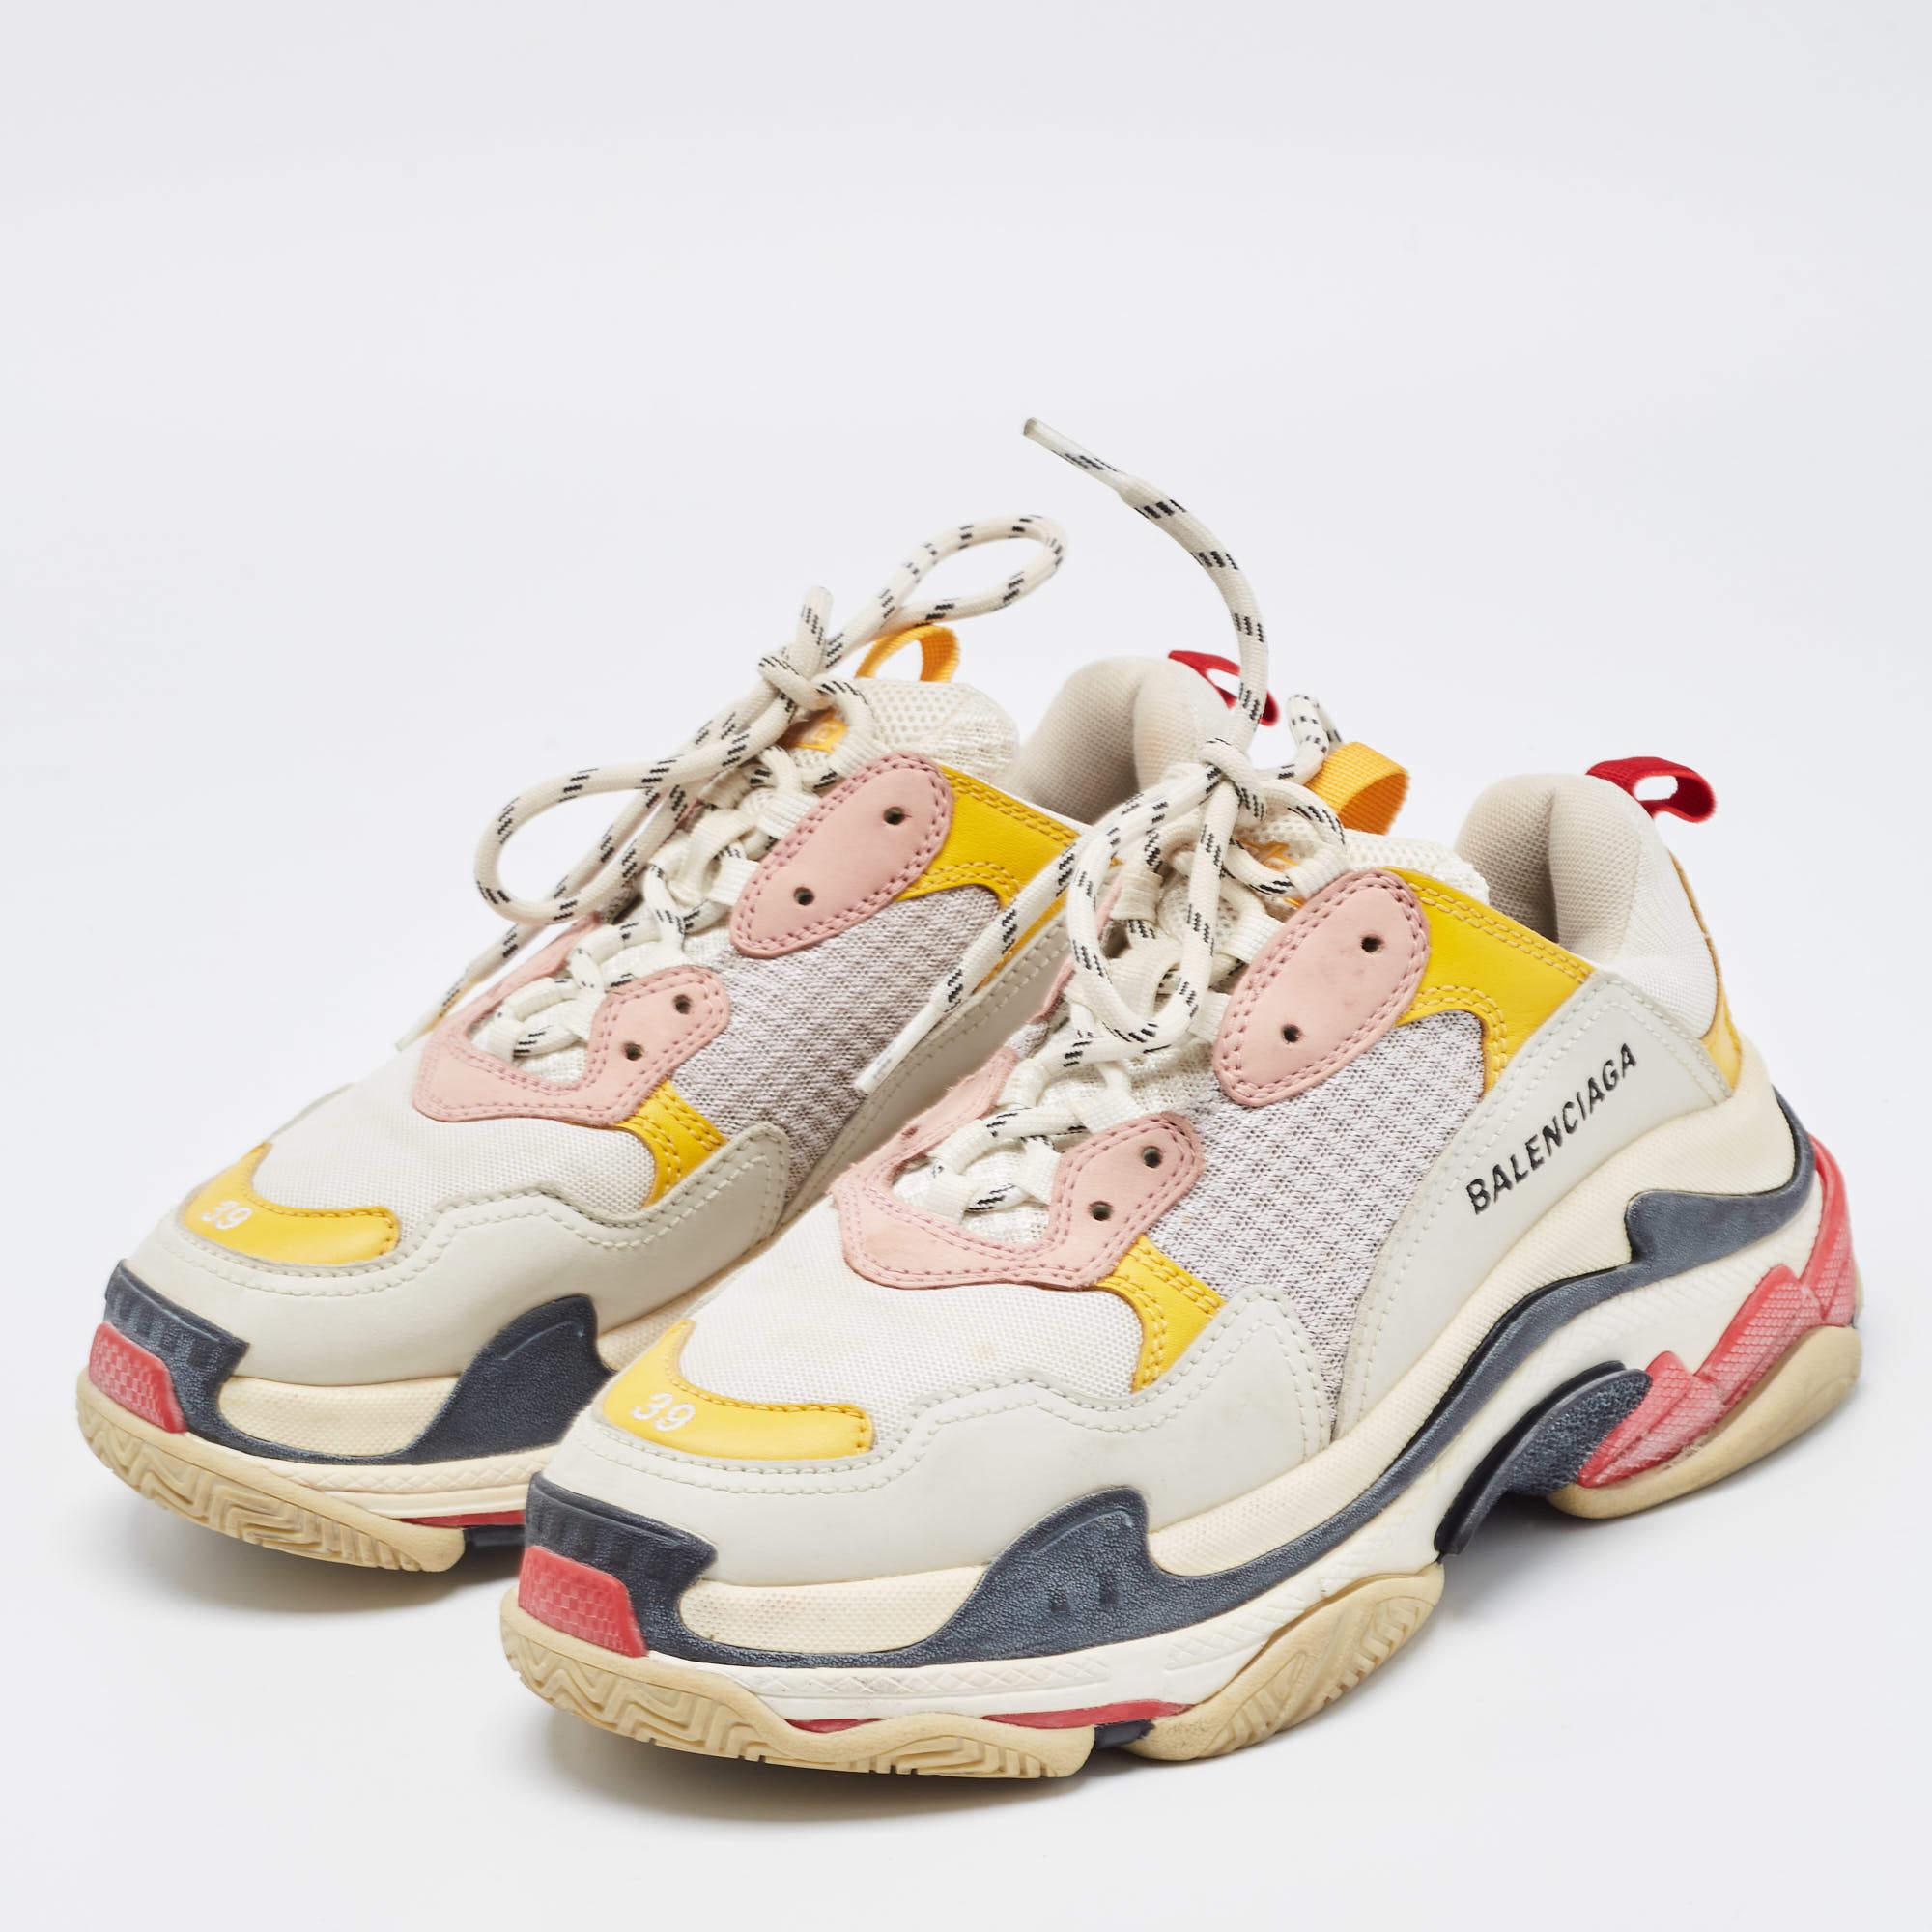 Women's Balenciaga Multicolor Mesh and Leather Triple S Sneakers Size 39 For Sale